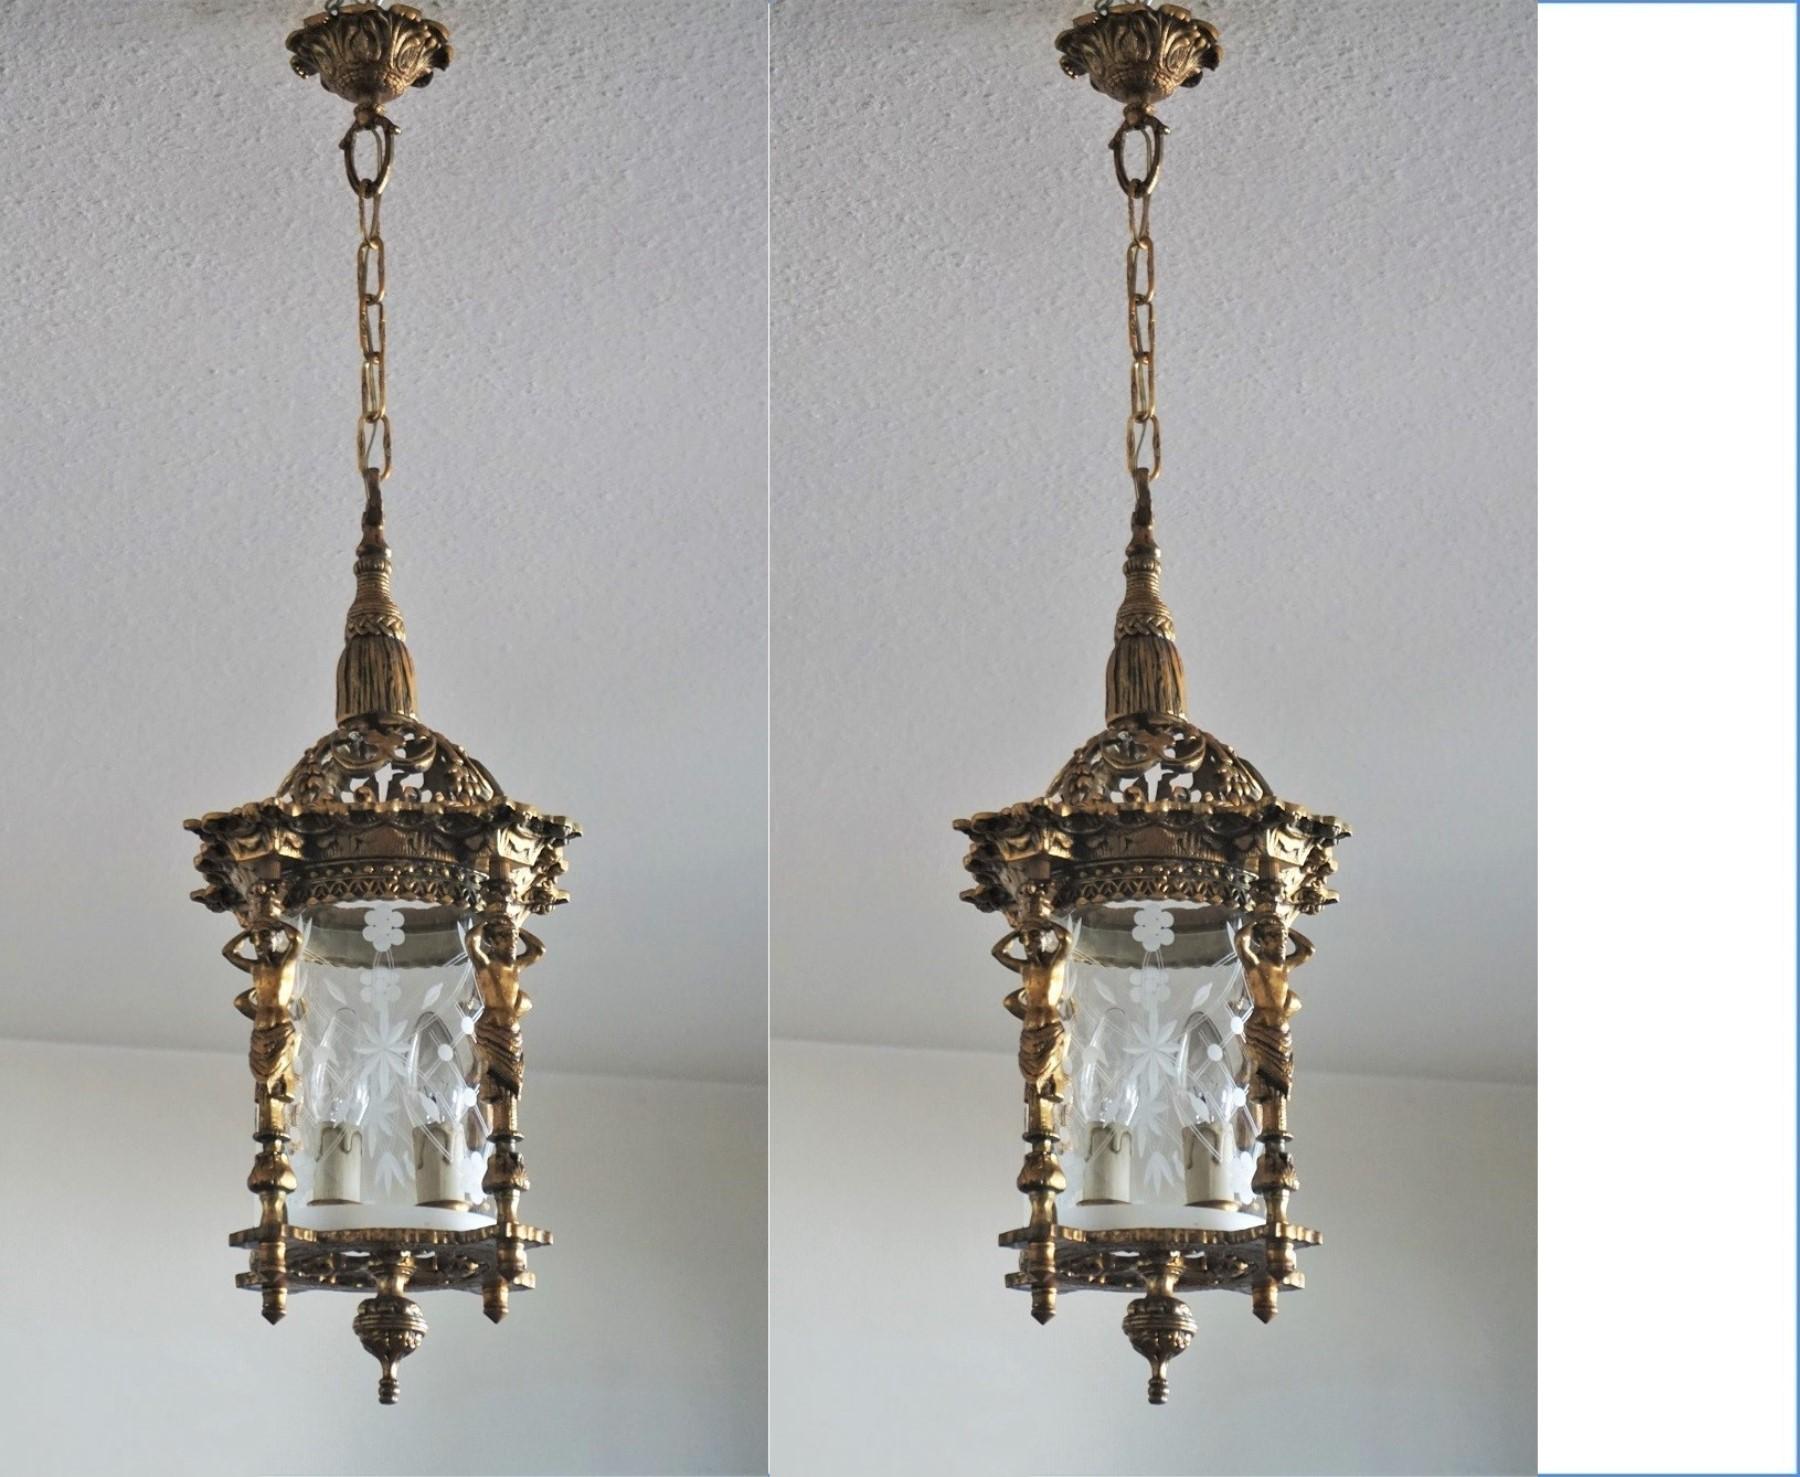 Cast Pair of French Empire Style Gilt Bronze Cut Glass Two-Light Lanterns Chandeliers